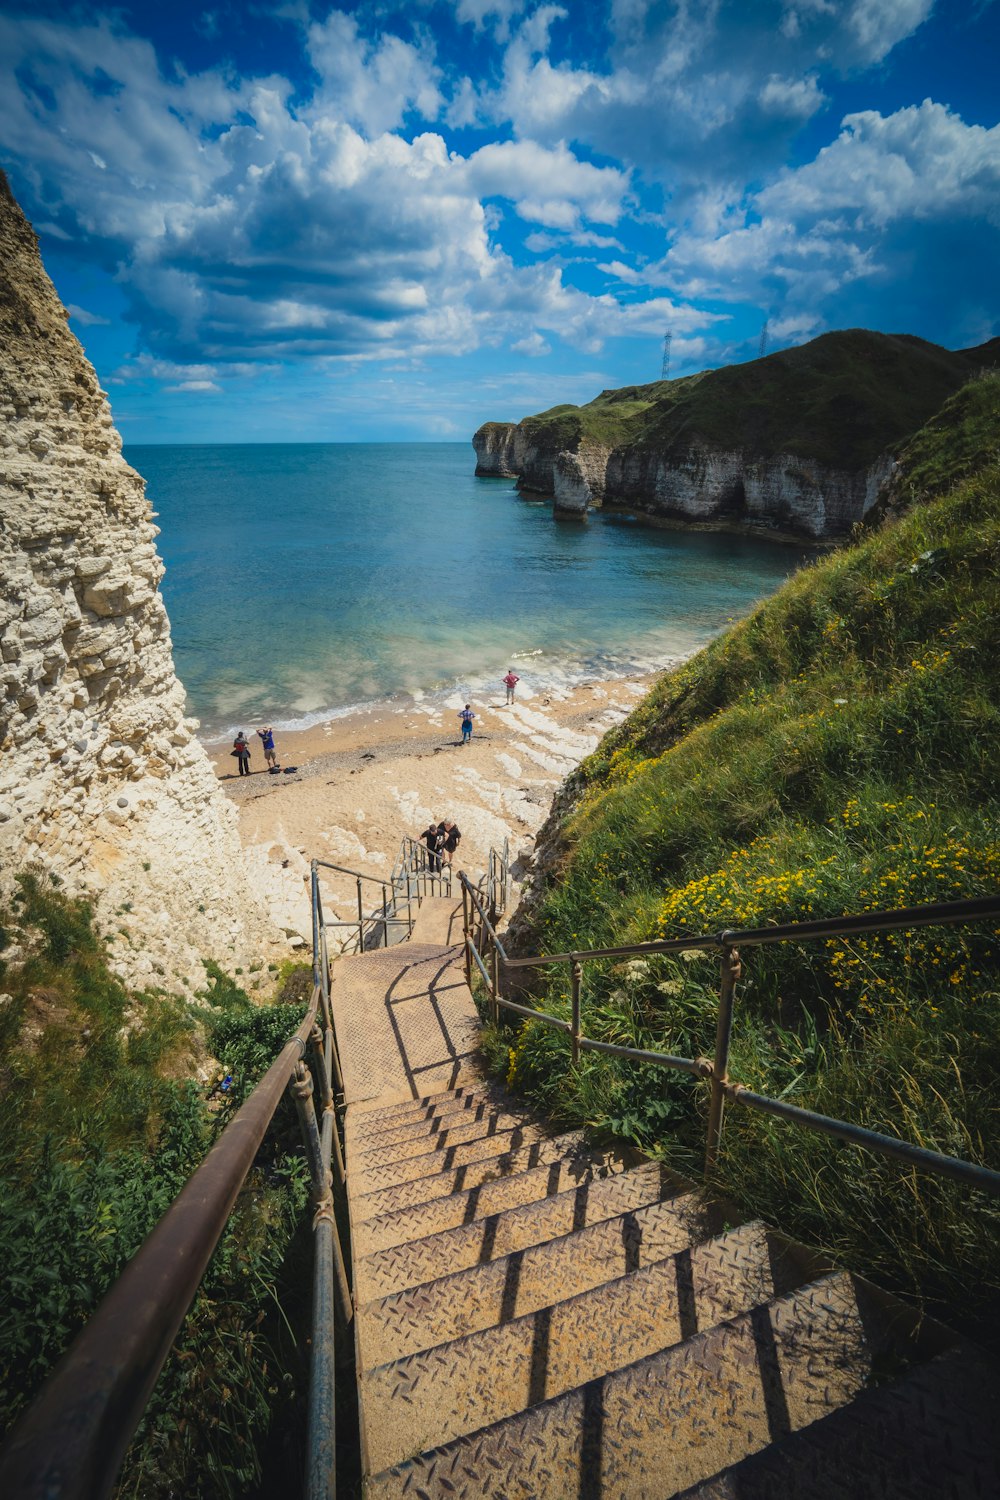 stairs lead down to a sandy beach with people on it